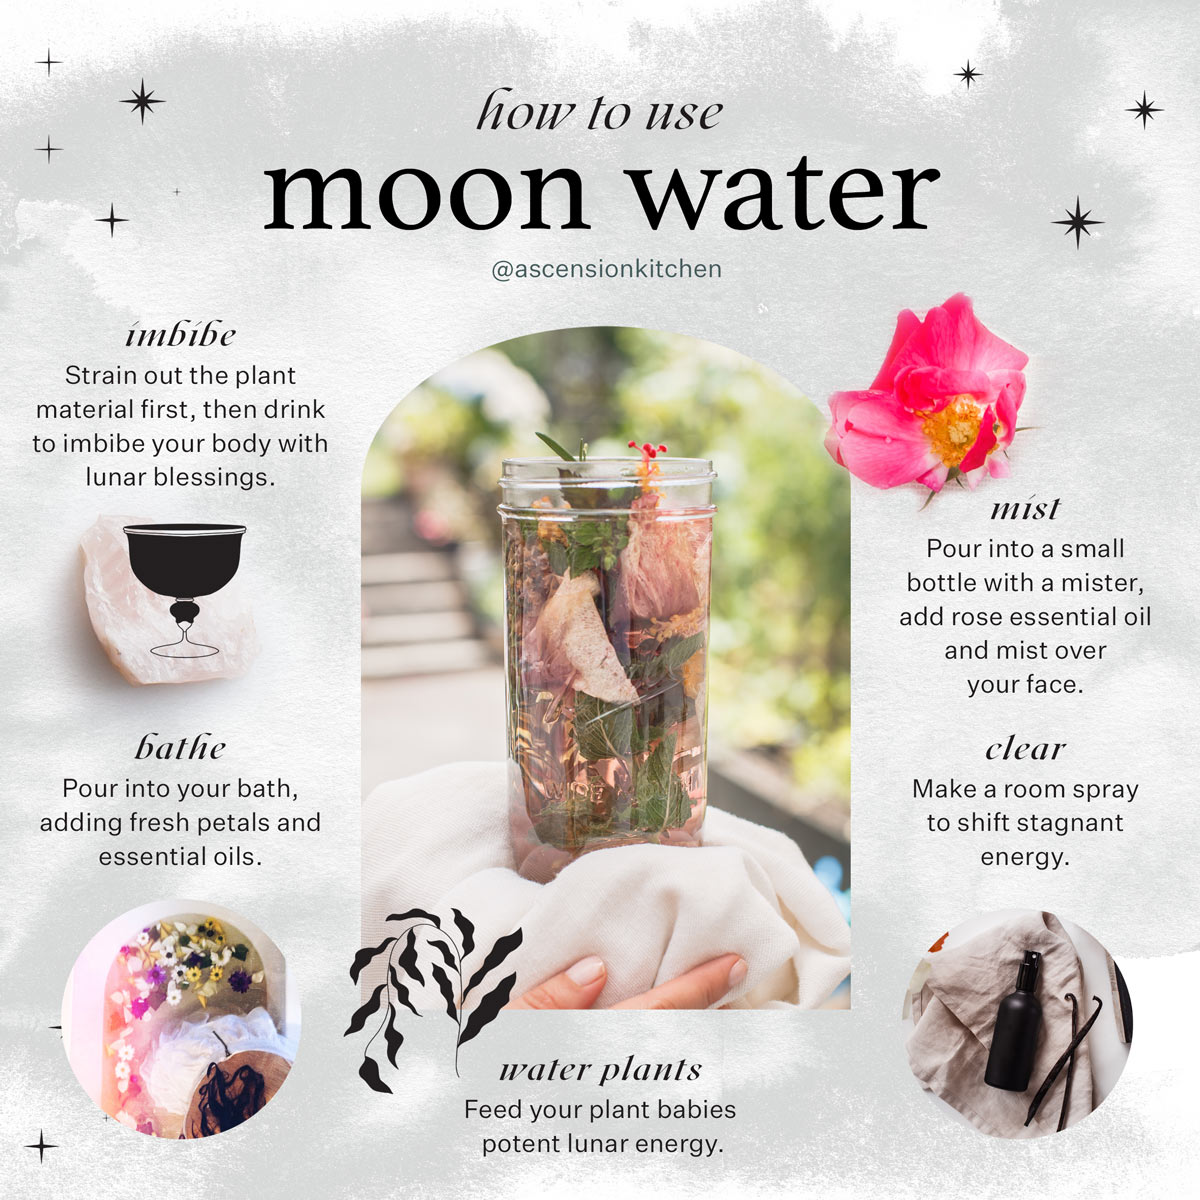 An infographic showing several different ways to use moon water, such as drinking it, bathing in it, misting it over the face, watering plants and clearing energy.